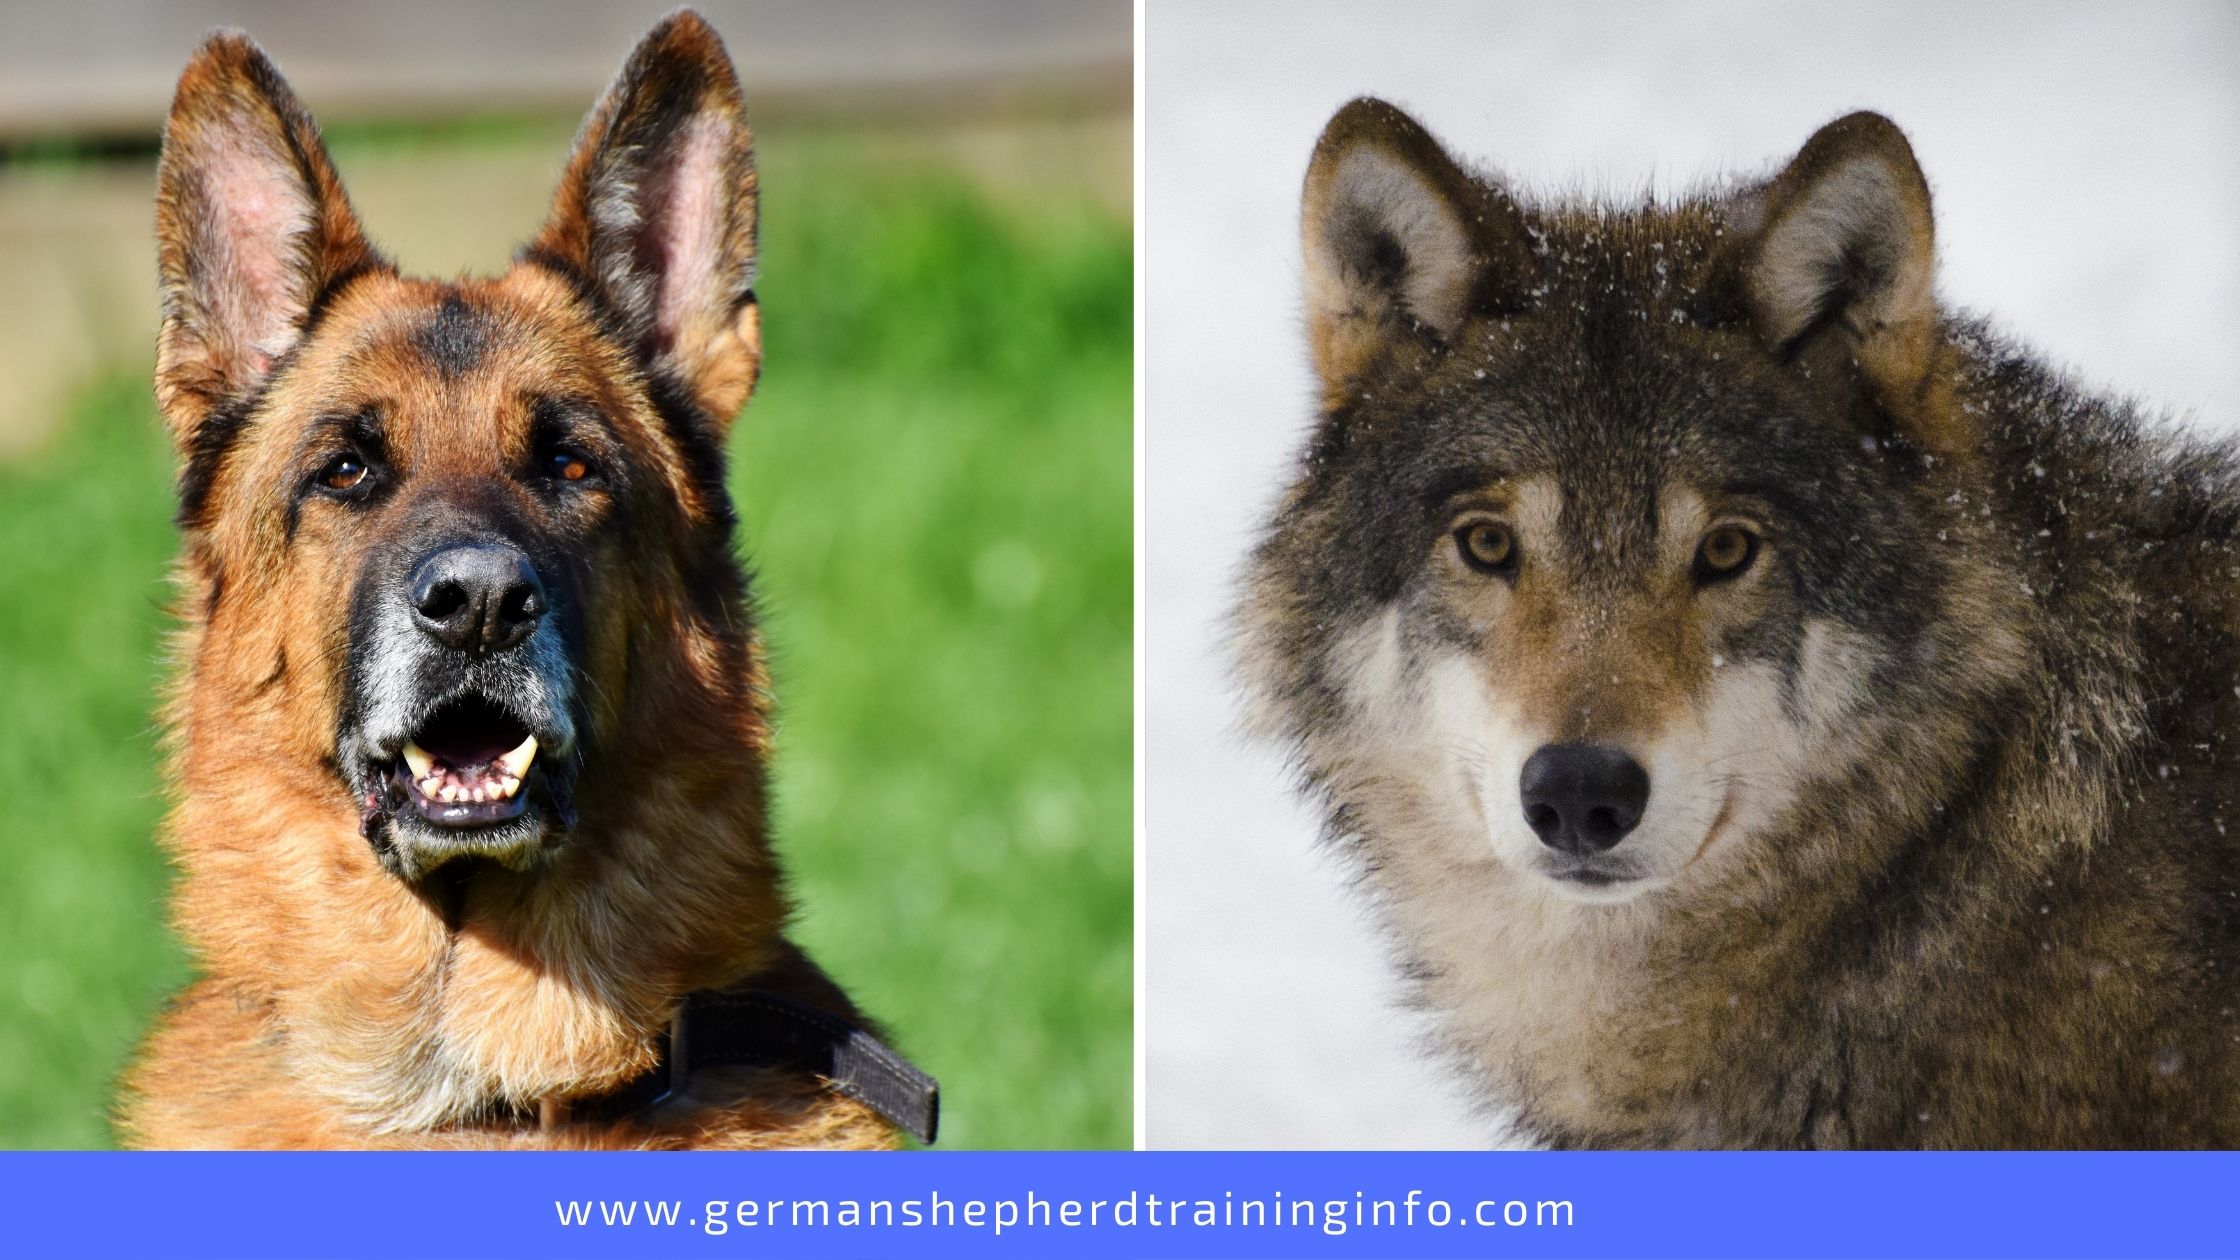 German Shepherd vs Wolf: The differences between the dog ...